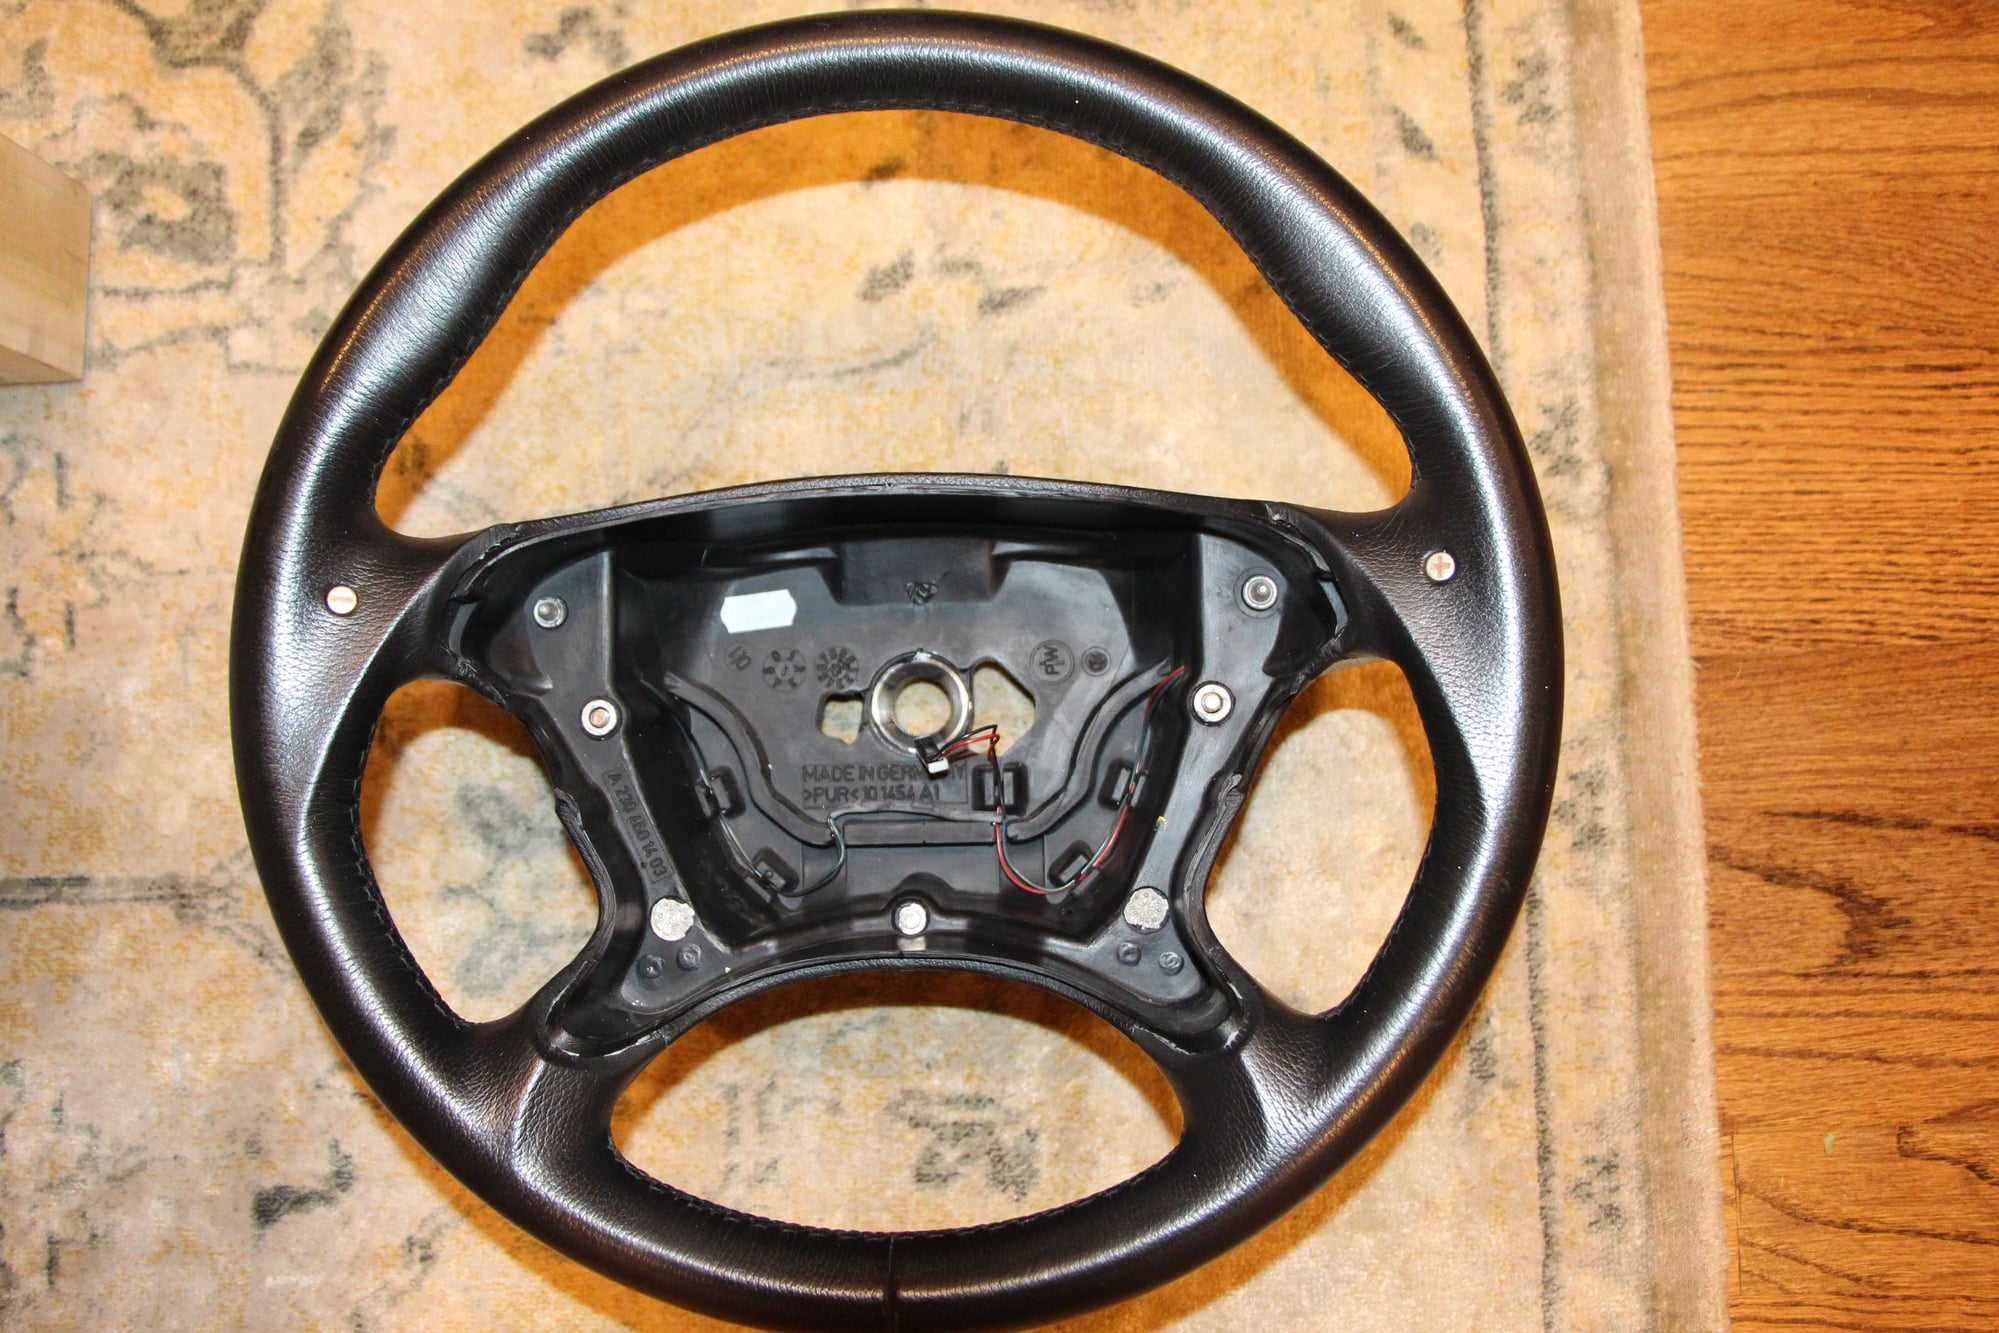 Interior/Upholstery - R230 AMG Steering Wheel PN:  A2304601403 - Used - 2003 to 2011 Mercedes-Benz 500SL - Lake Wylie, SC 29710, United States